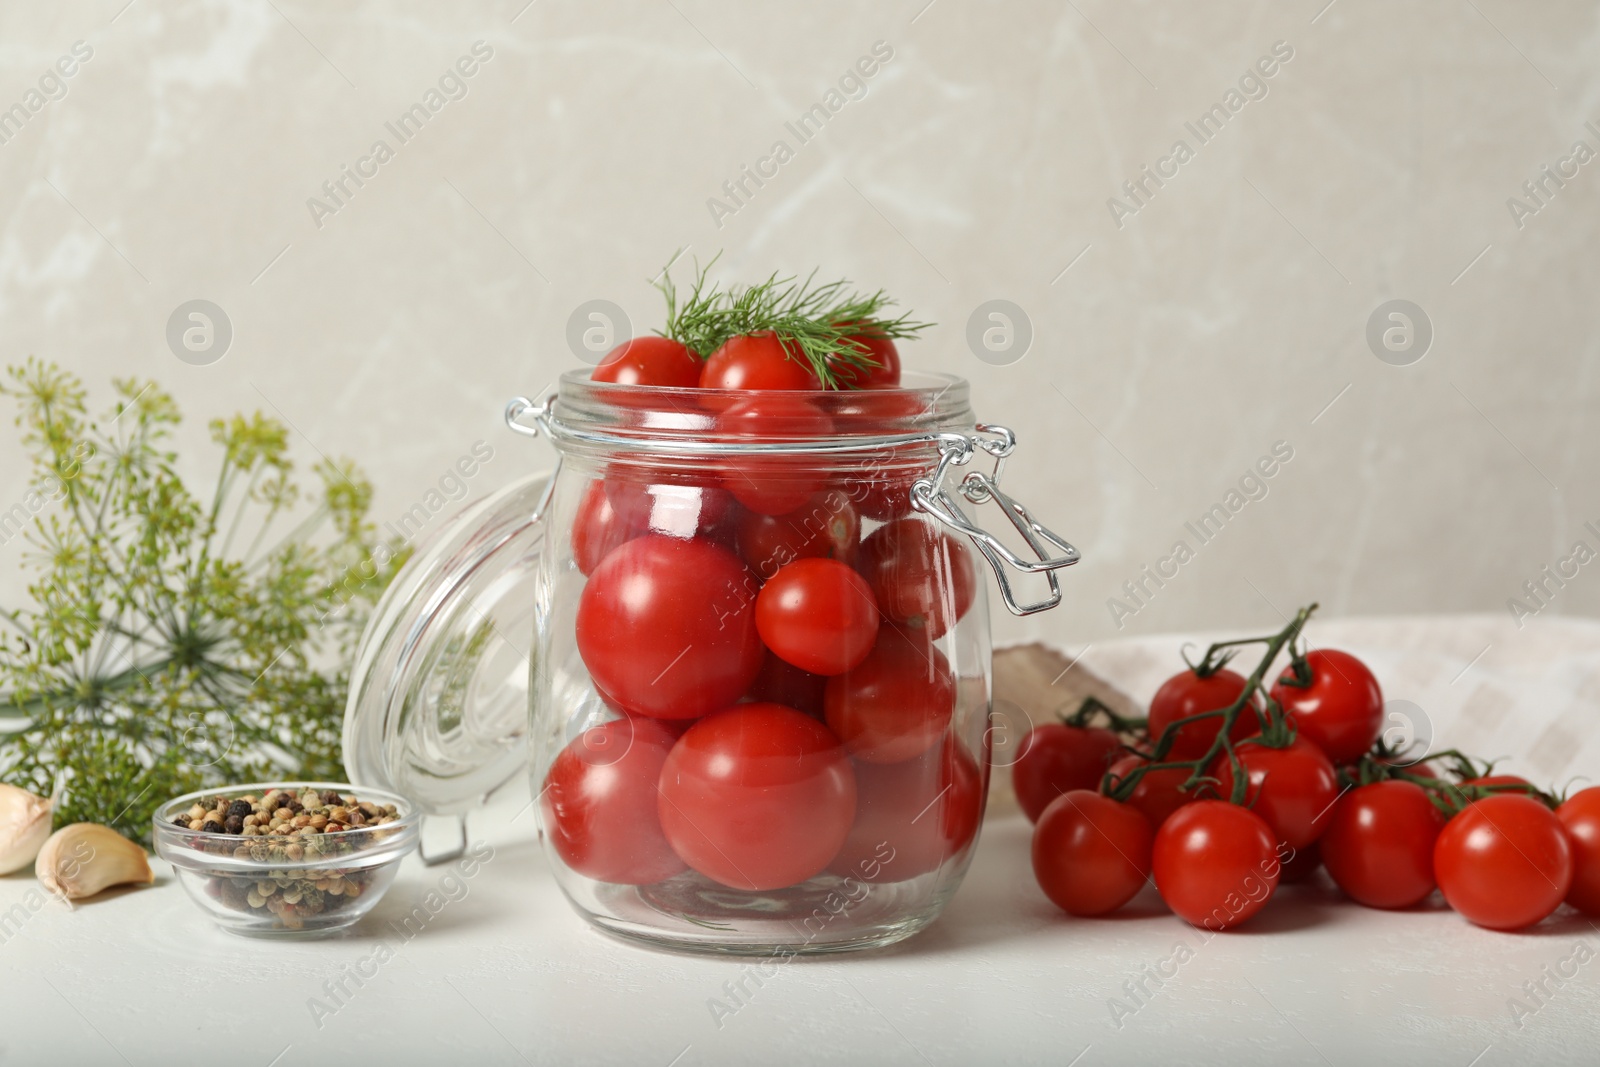 Photo of Pickling jar with fresh tomatoes on white table